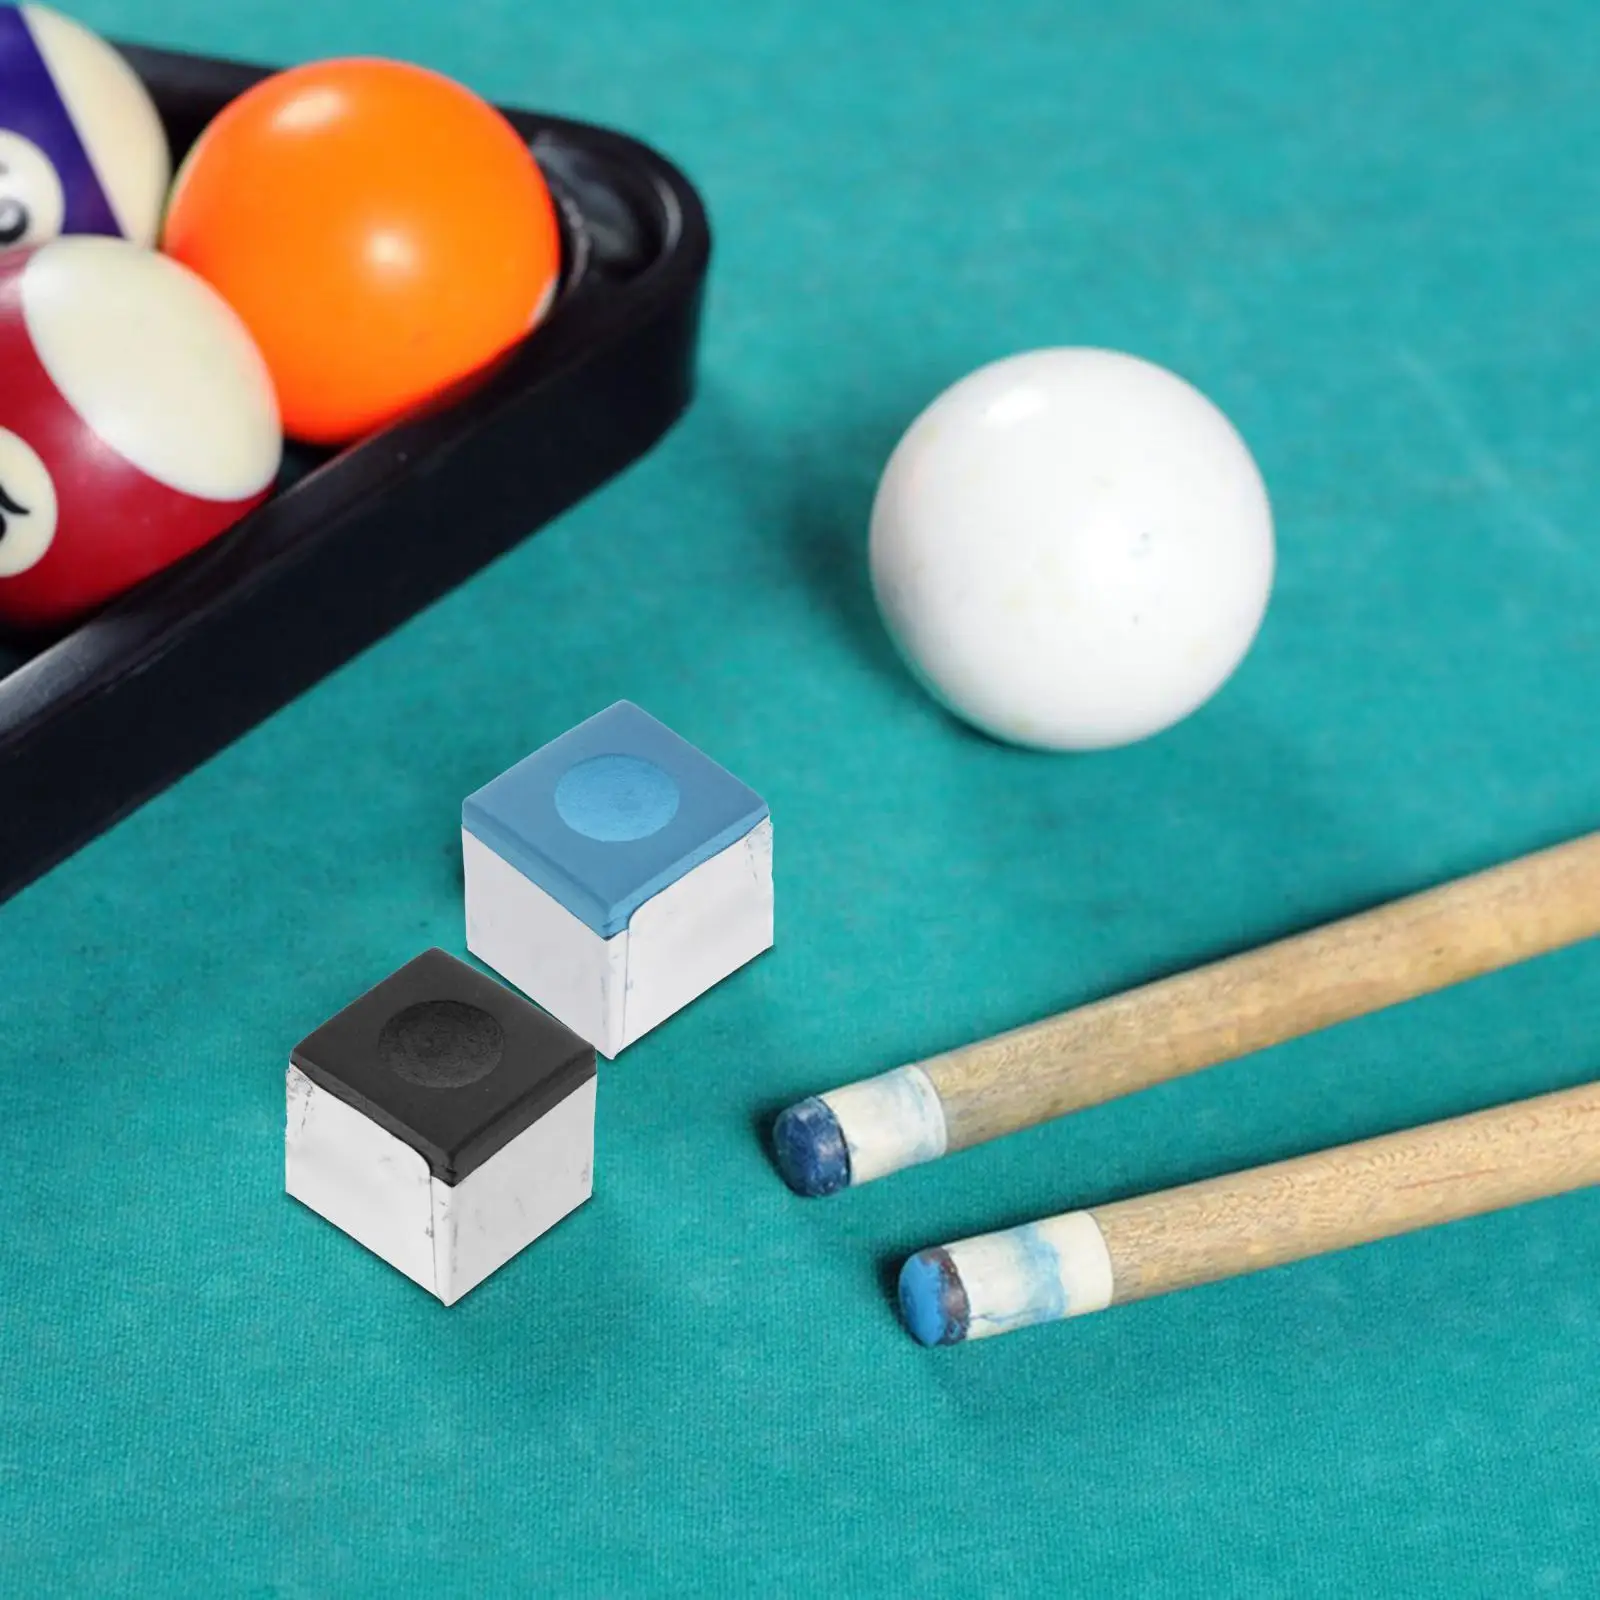 12 Pieces Pool Chalk Cubes Cubes of Pool Cue Chalk Accessory for Tournaments